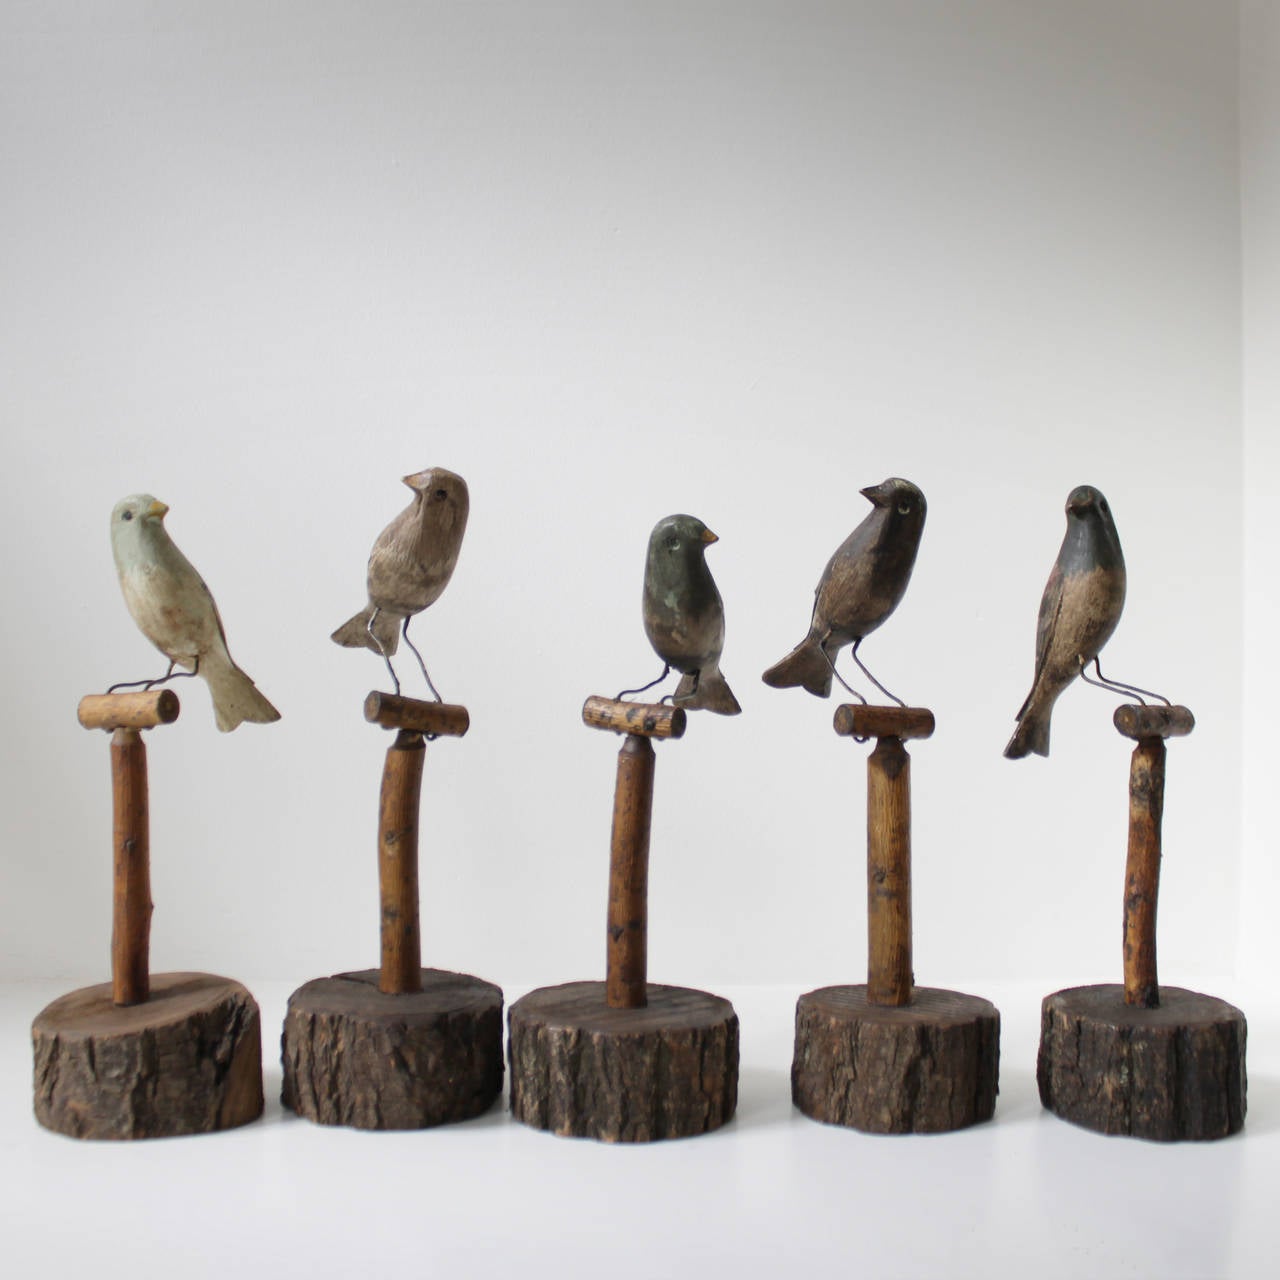 Five wooden scandinavian birds, in all probability decoy birds.
Beautifully decorative, carved and painted in full size.